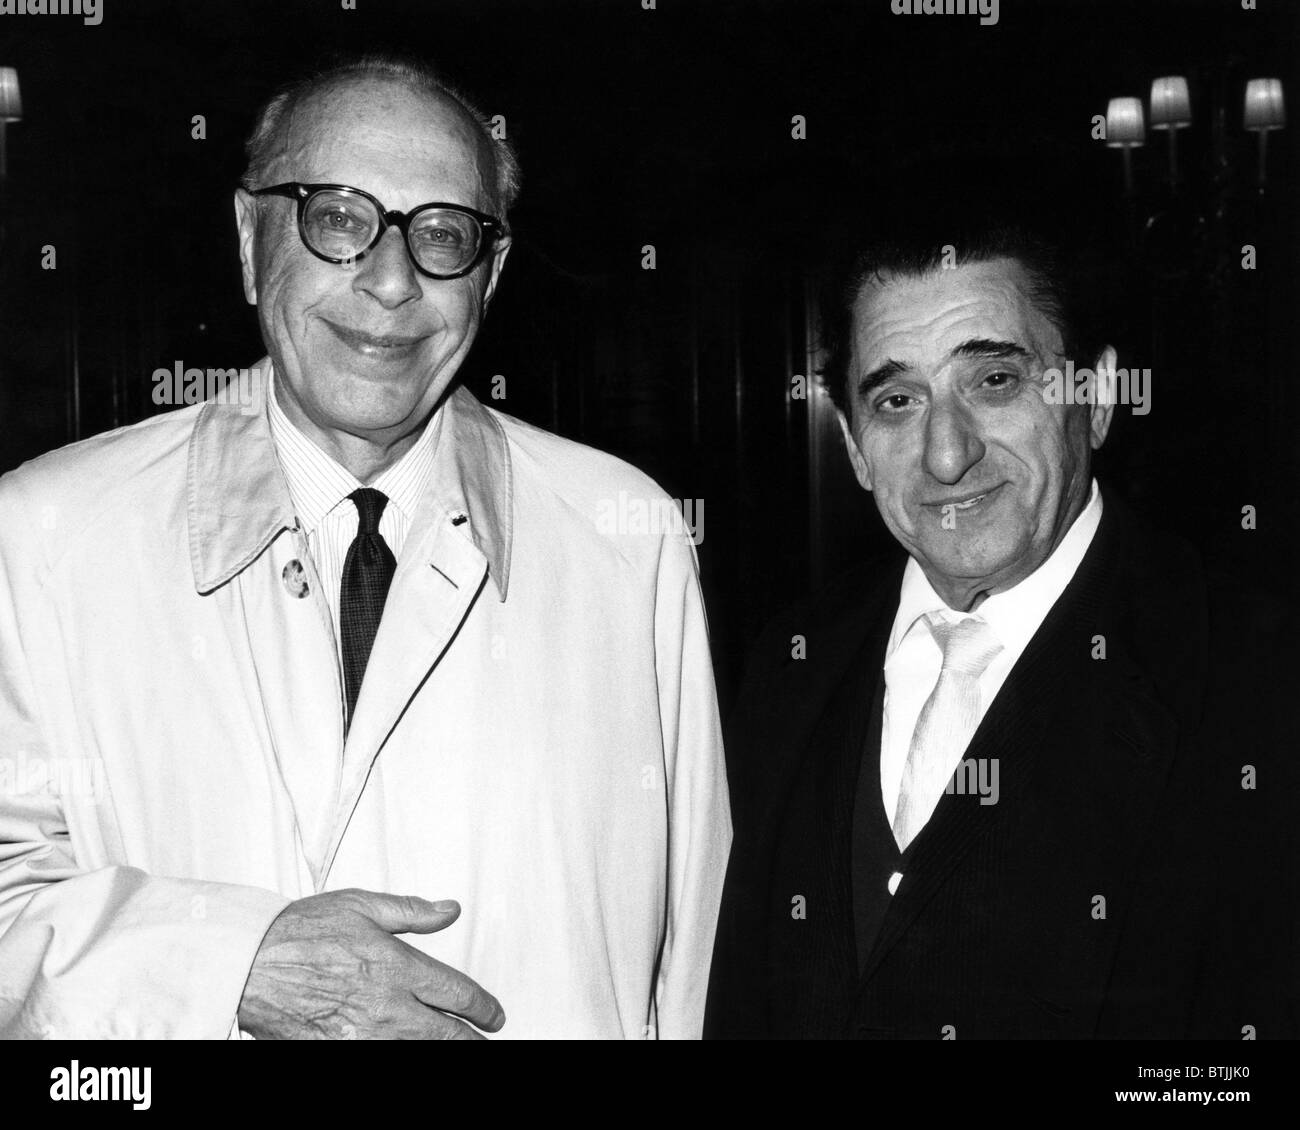 Cleveland Orchestra music director George Szell (left), opera tenor Jan Peerce (right), meeting in Vienna, Austria, 1965. Stock Photo